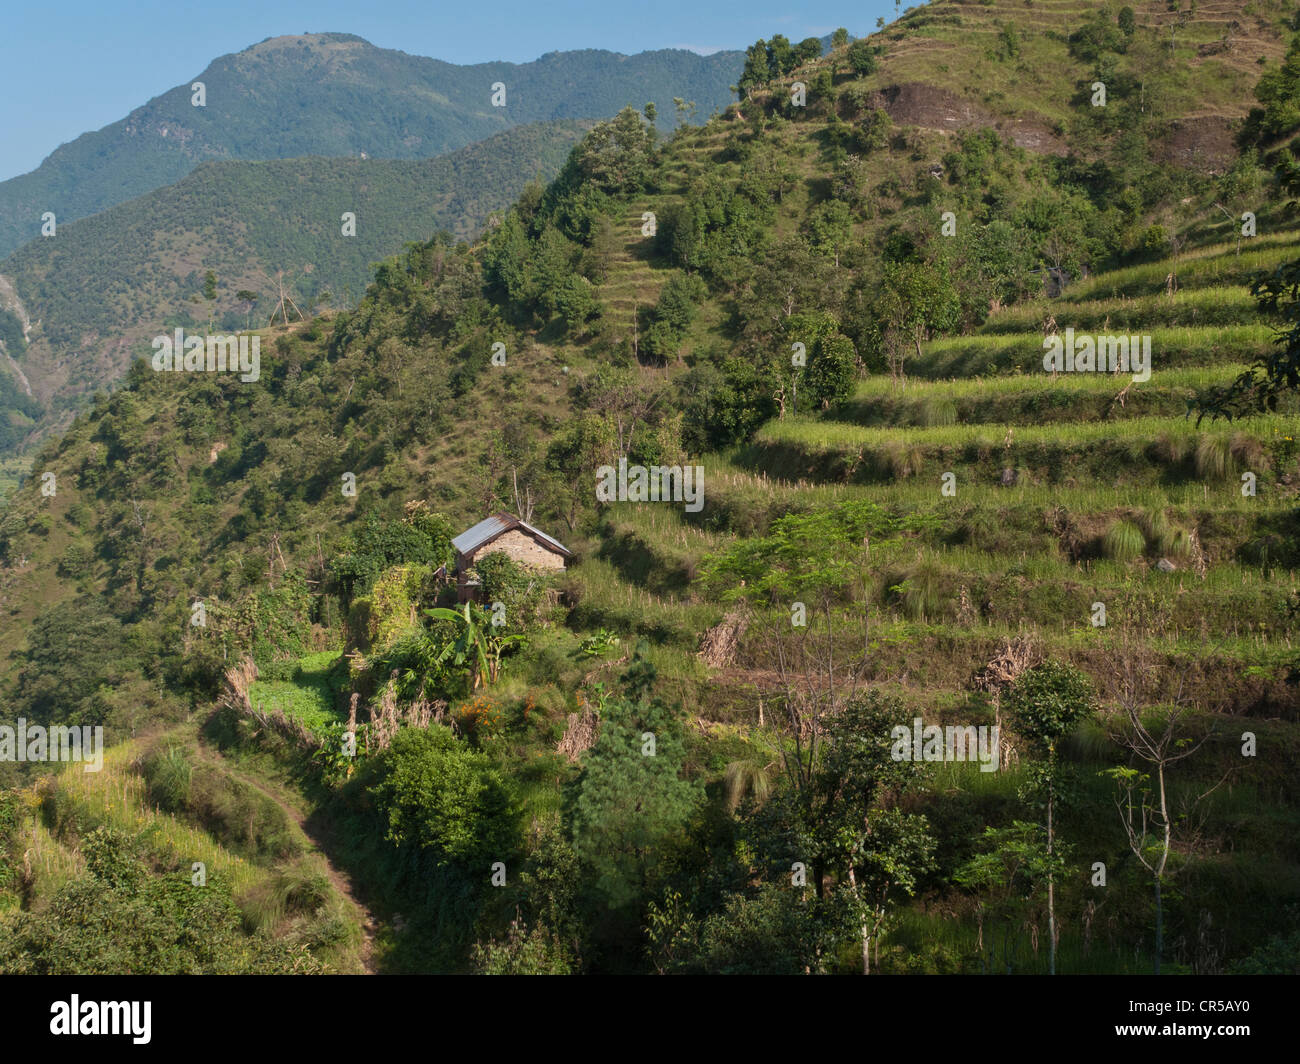 Terraced fields, the only way to plant crops in the hilly region of Helambu, Nepal, Asia Stock Photo